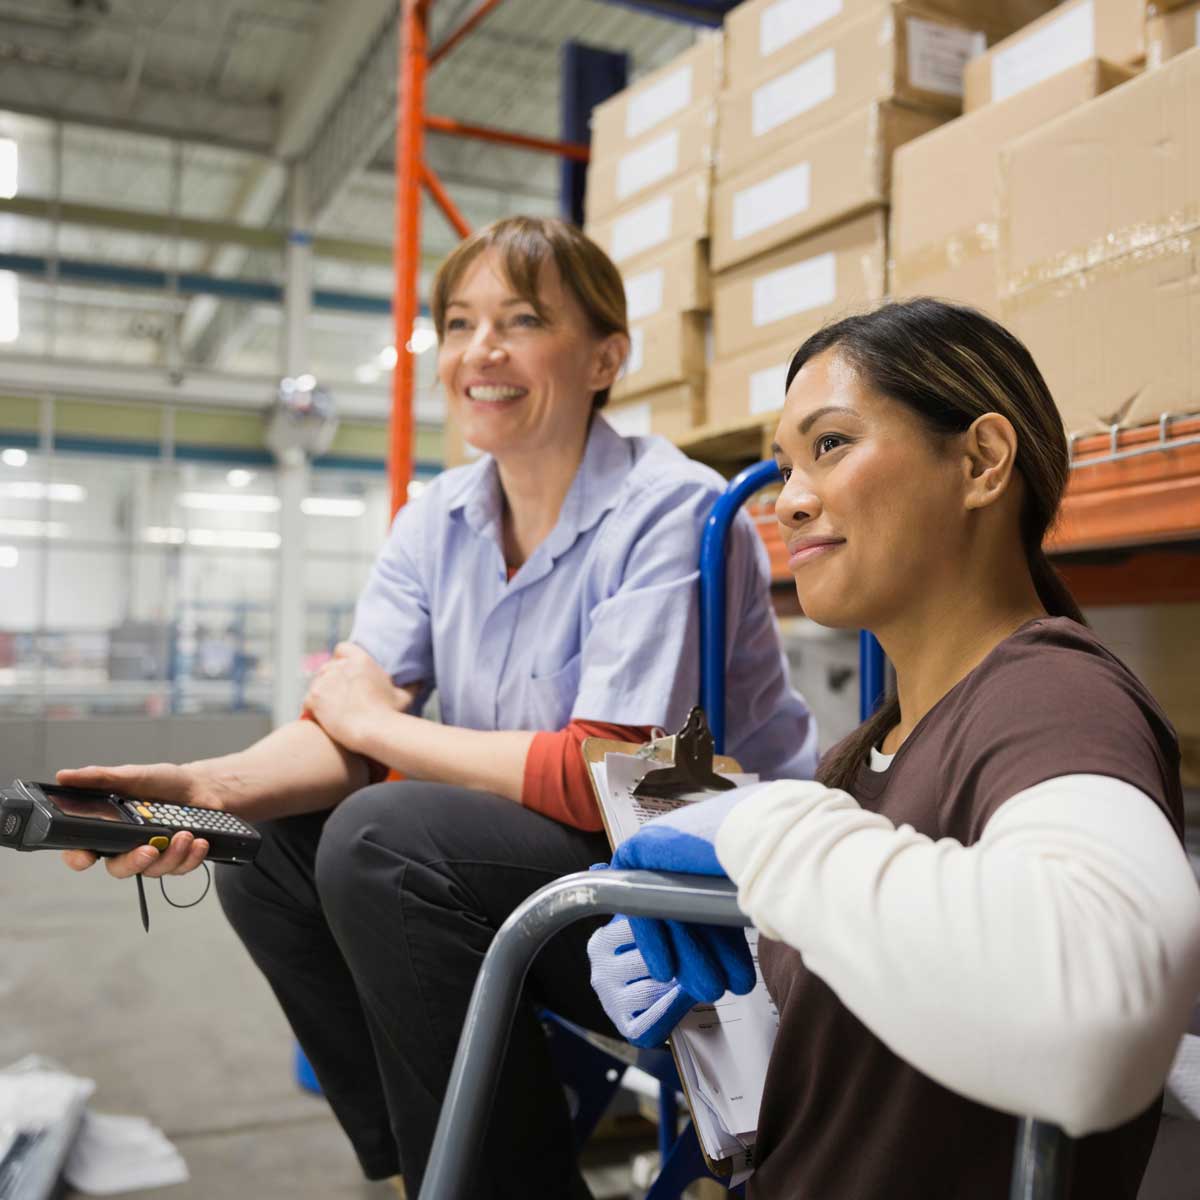 Female workers smiling in warehouse